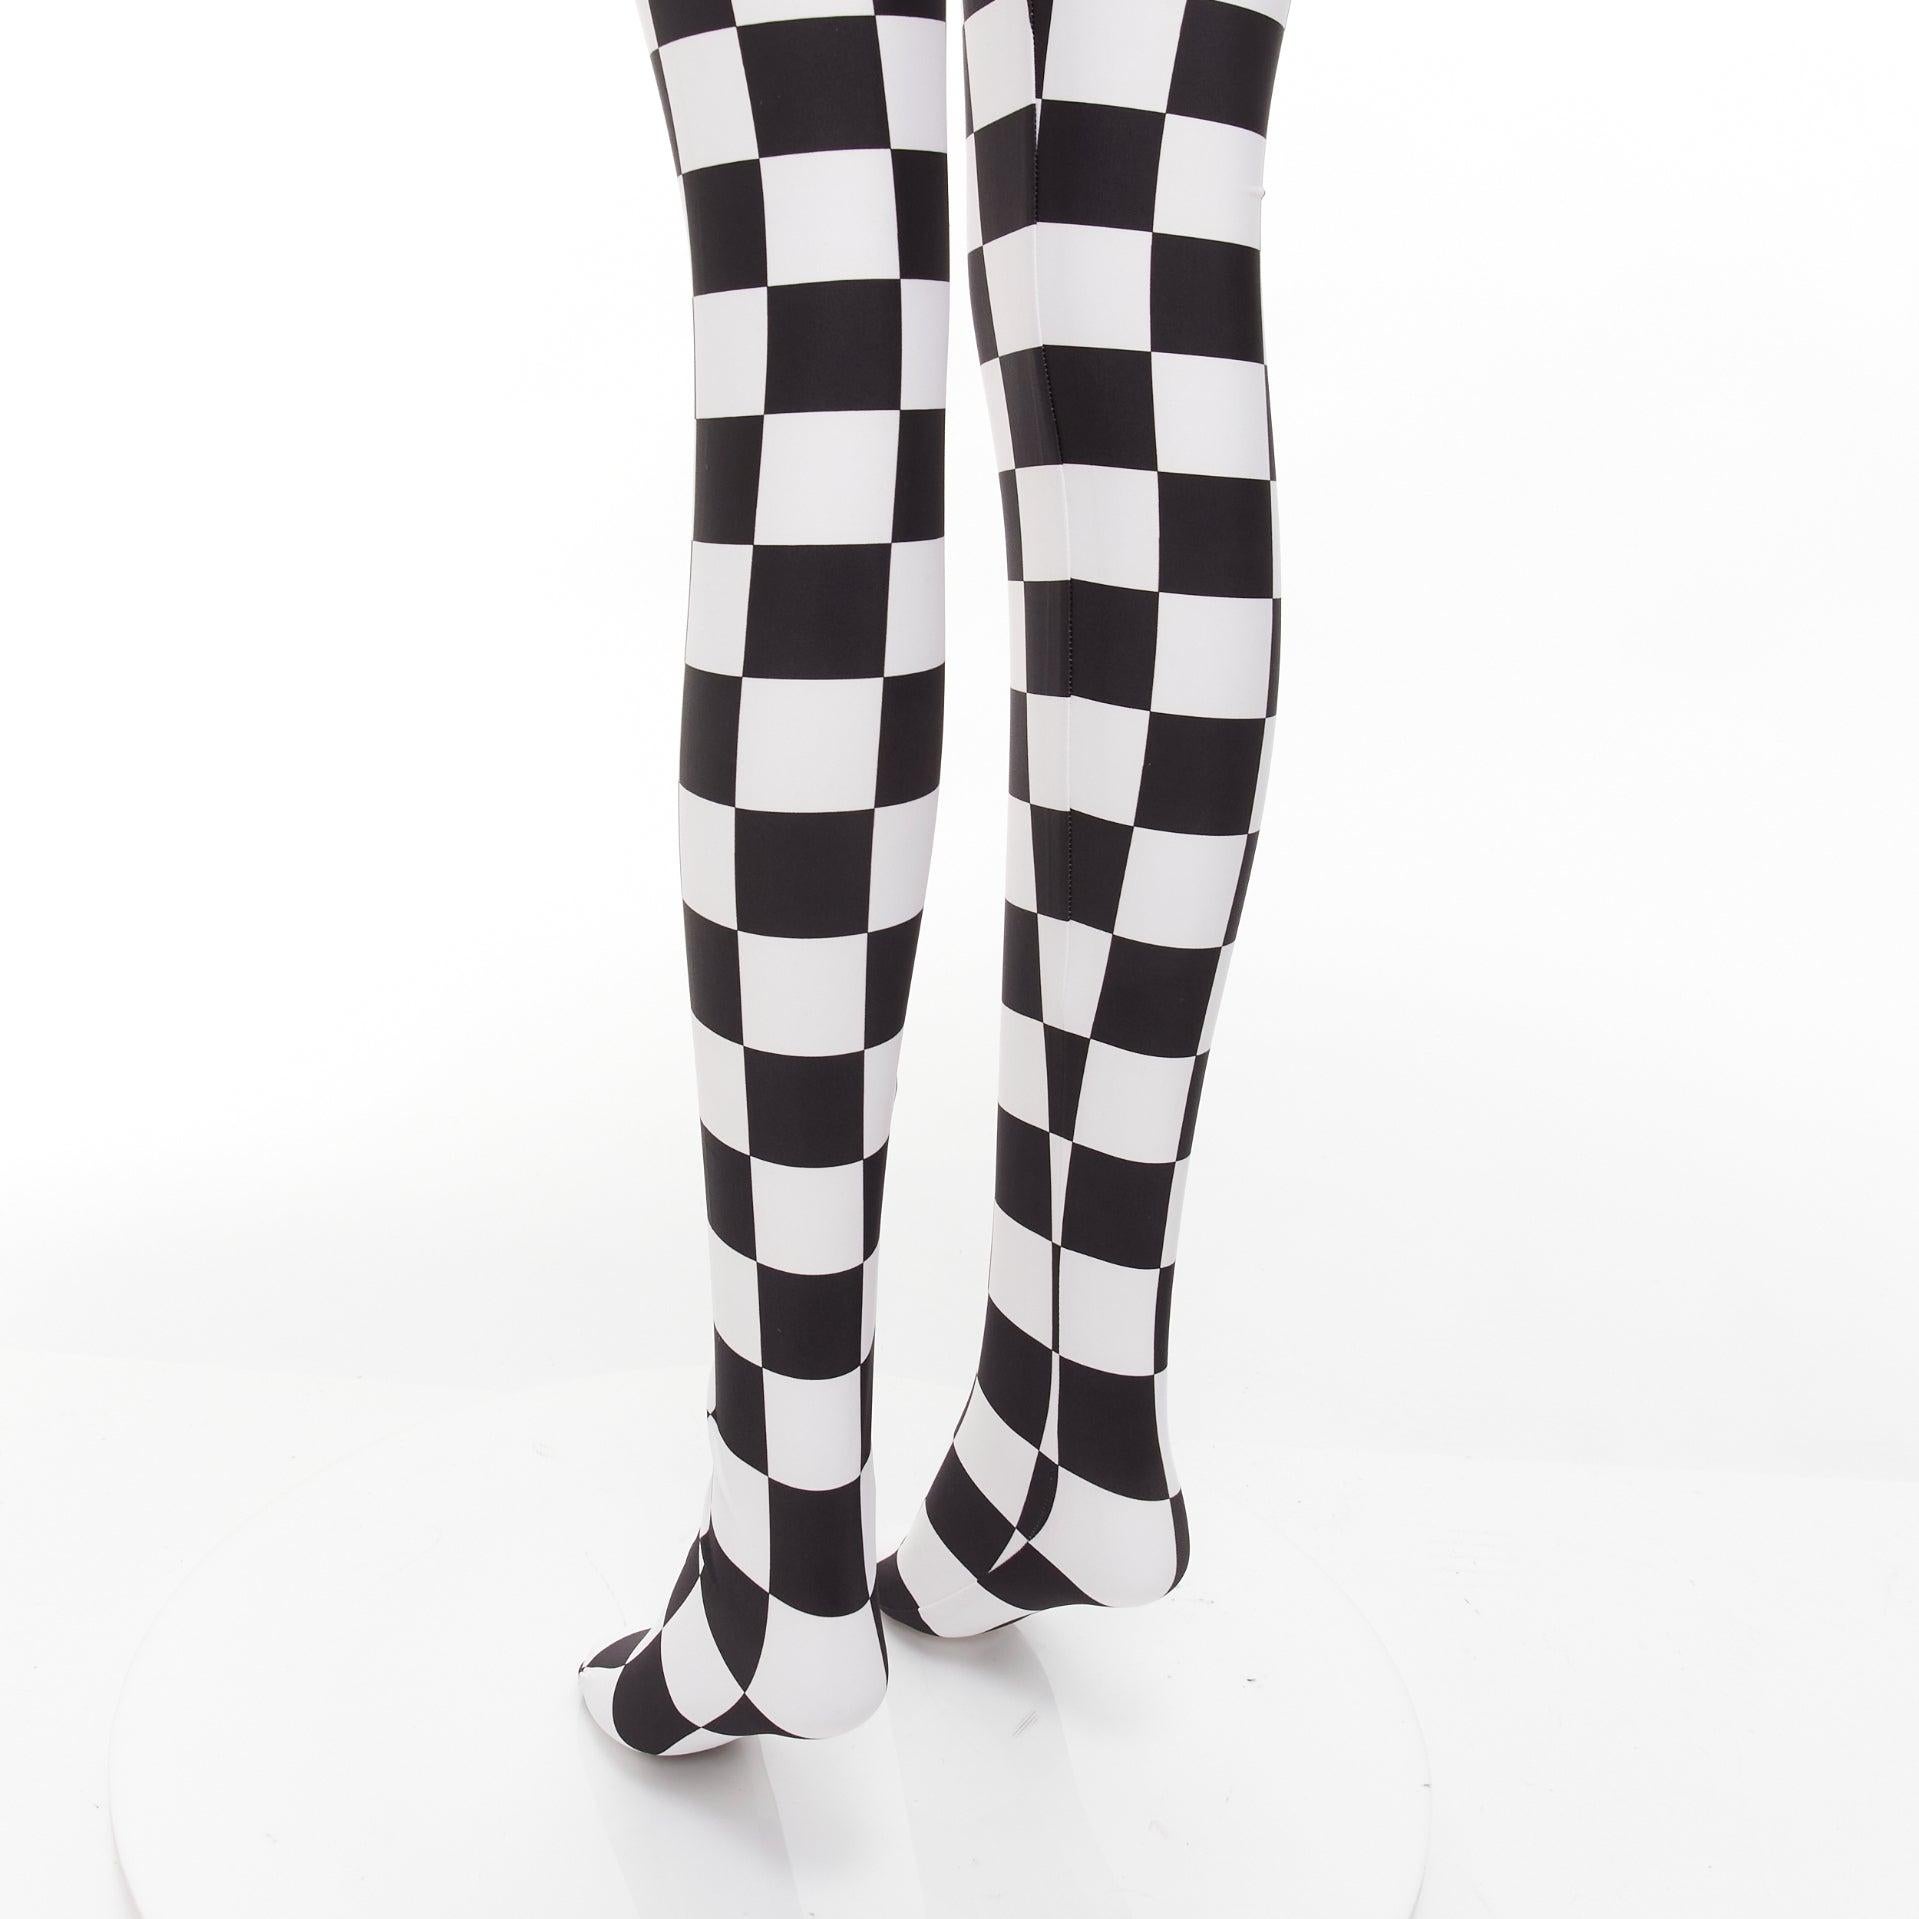 COMME DES GARCONS 2021 black white checkerboard tight legging XS
Reference: AAWC/A00889
Brand: Comme Des Garcons
Collection: 2021
Material: Polyester, Blend
Color: Black, White
Pattern: Checkered
Closure: Slip On
Made in: